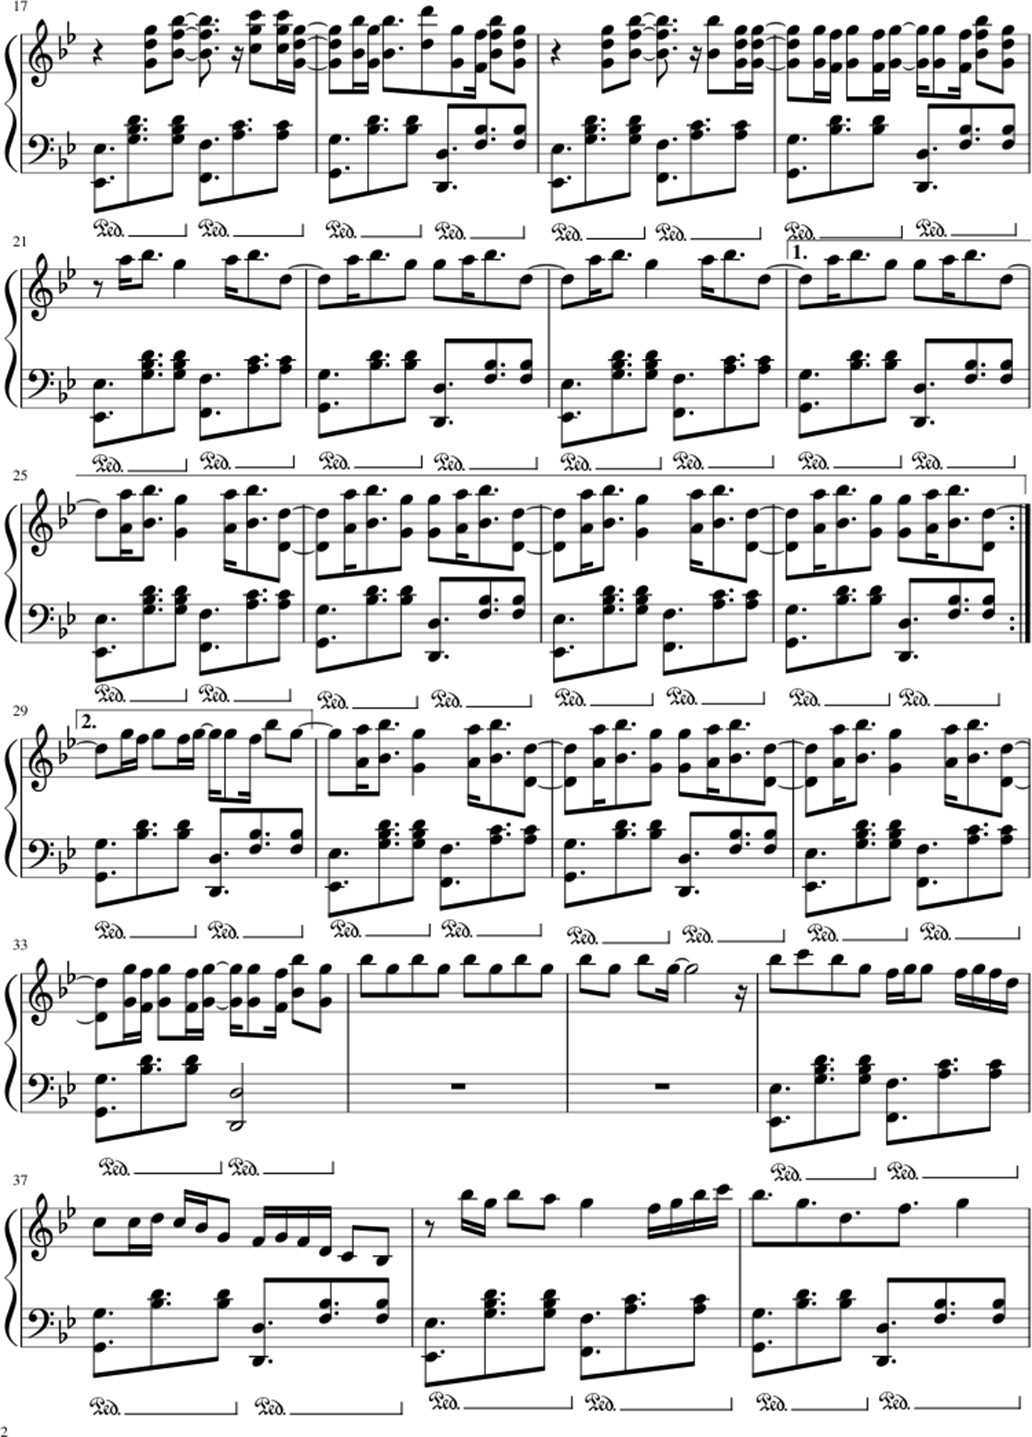 Lean on sheet music notes 2